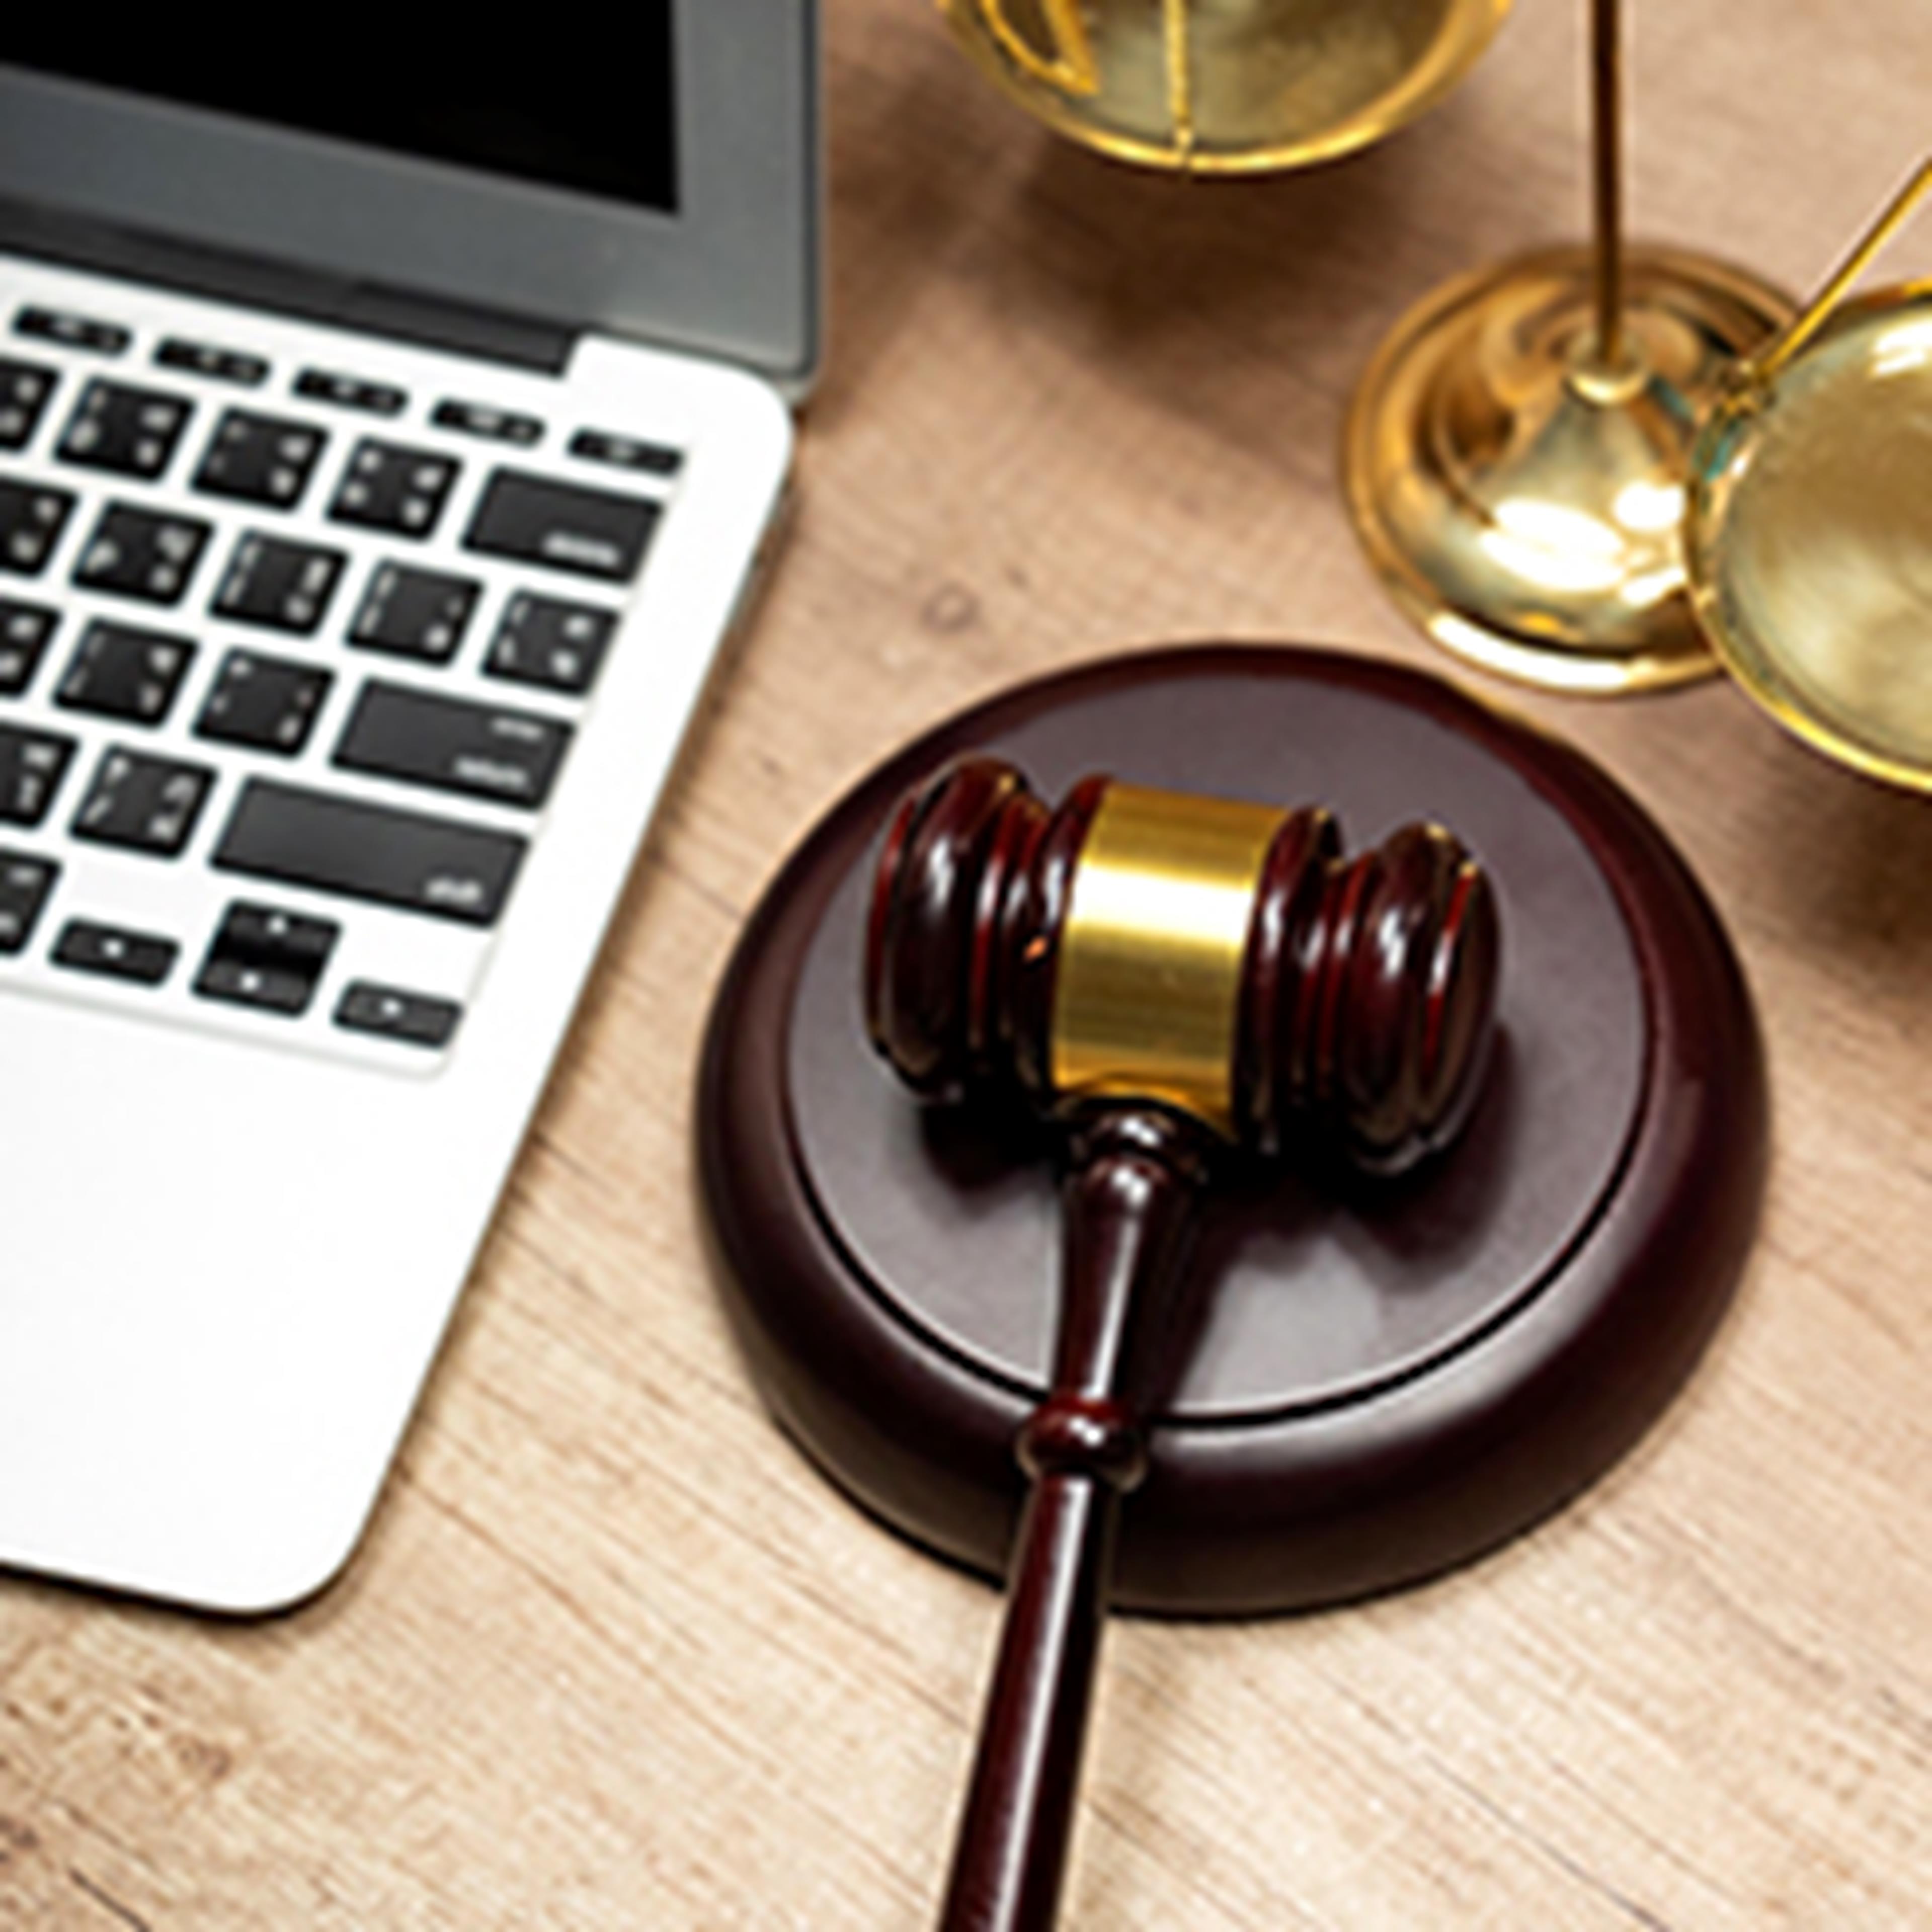 Partially visible laptop on the left of the image, a wooden gavel and block to the lower right and a partially visible set of golden scales to the top right of the image